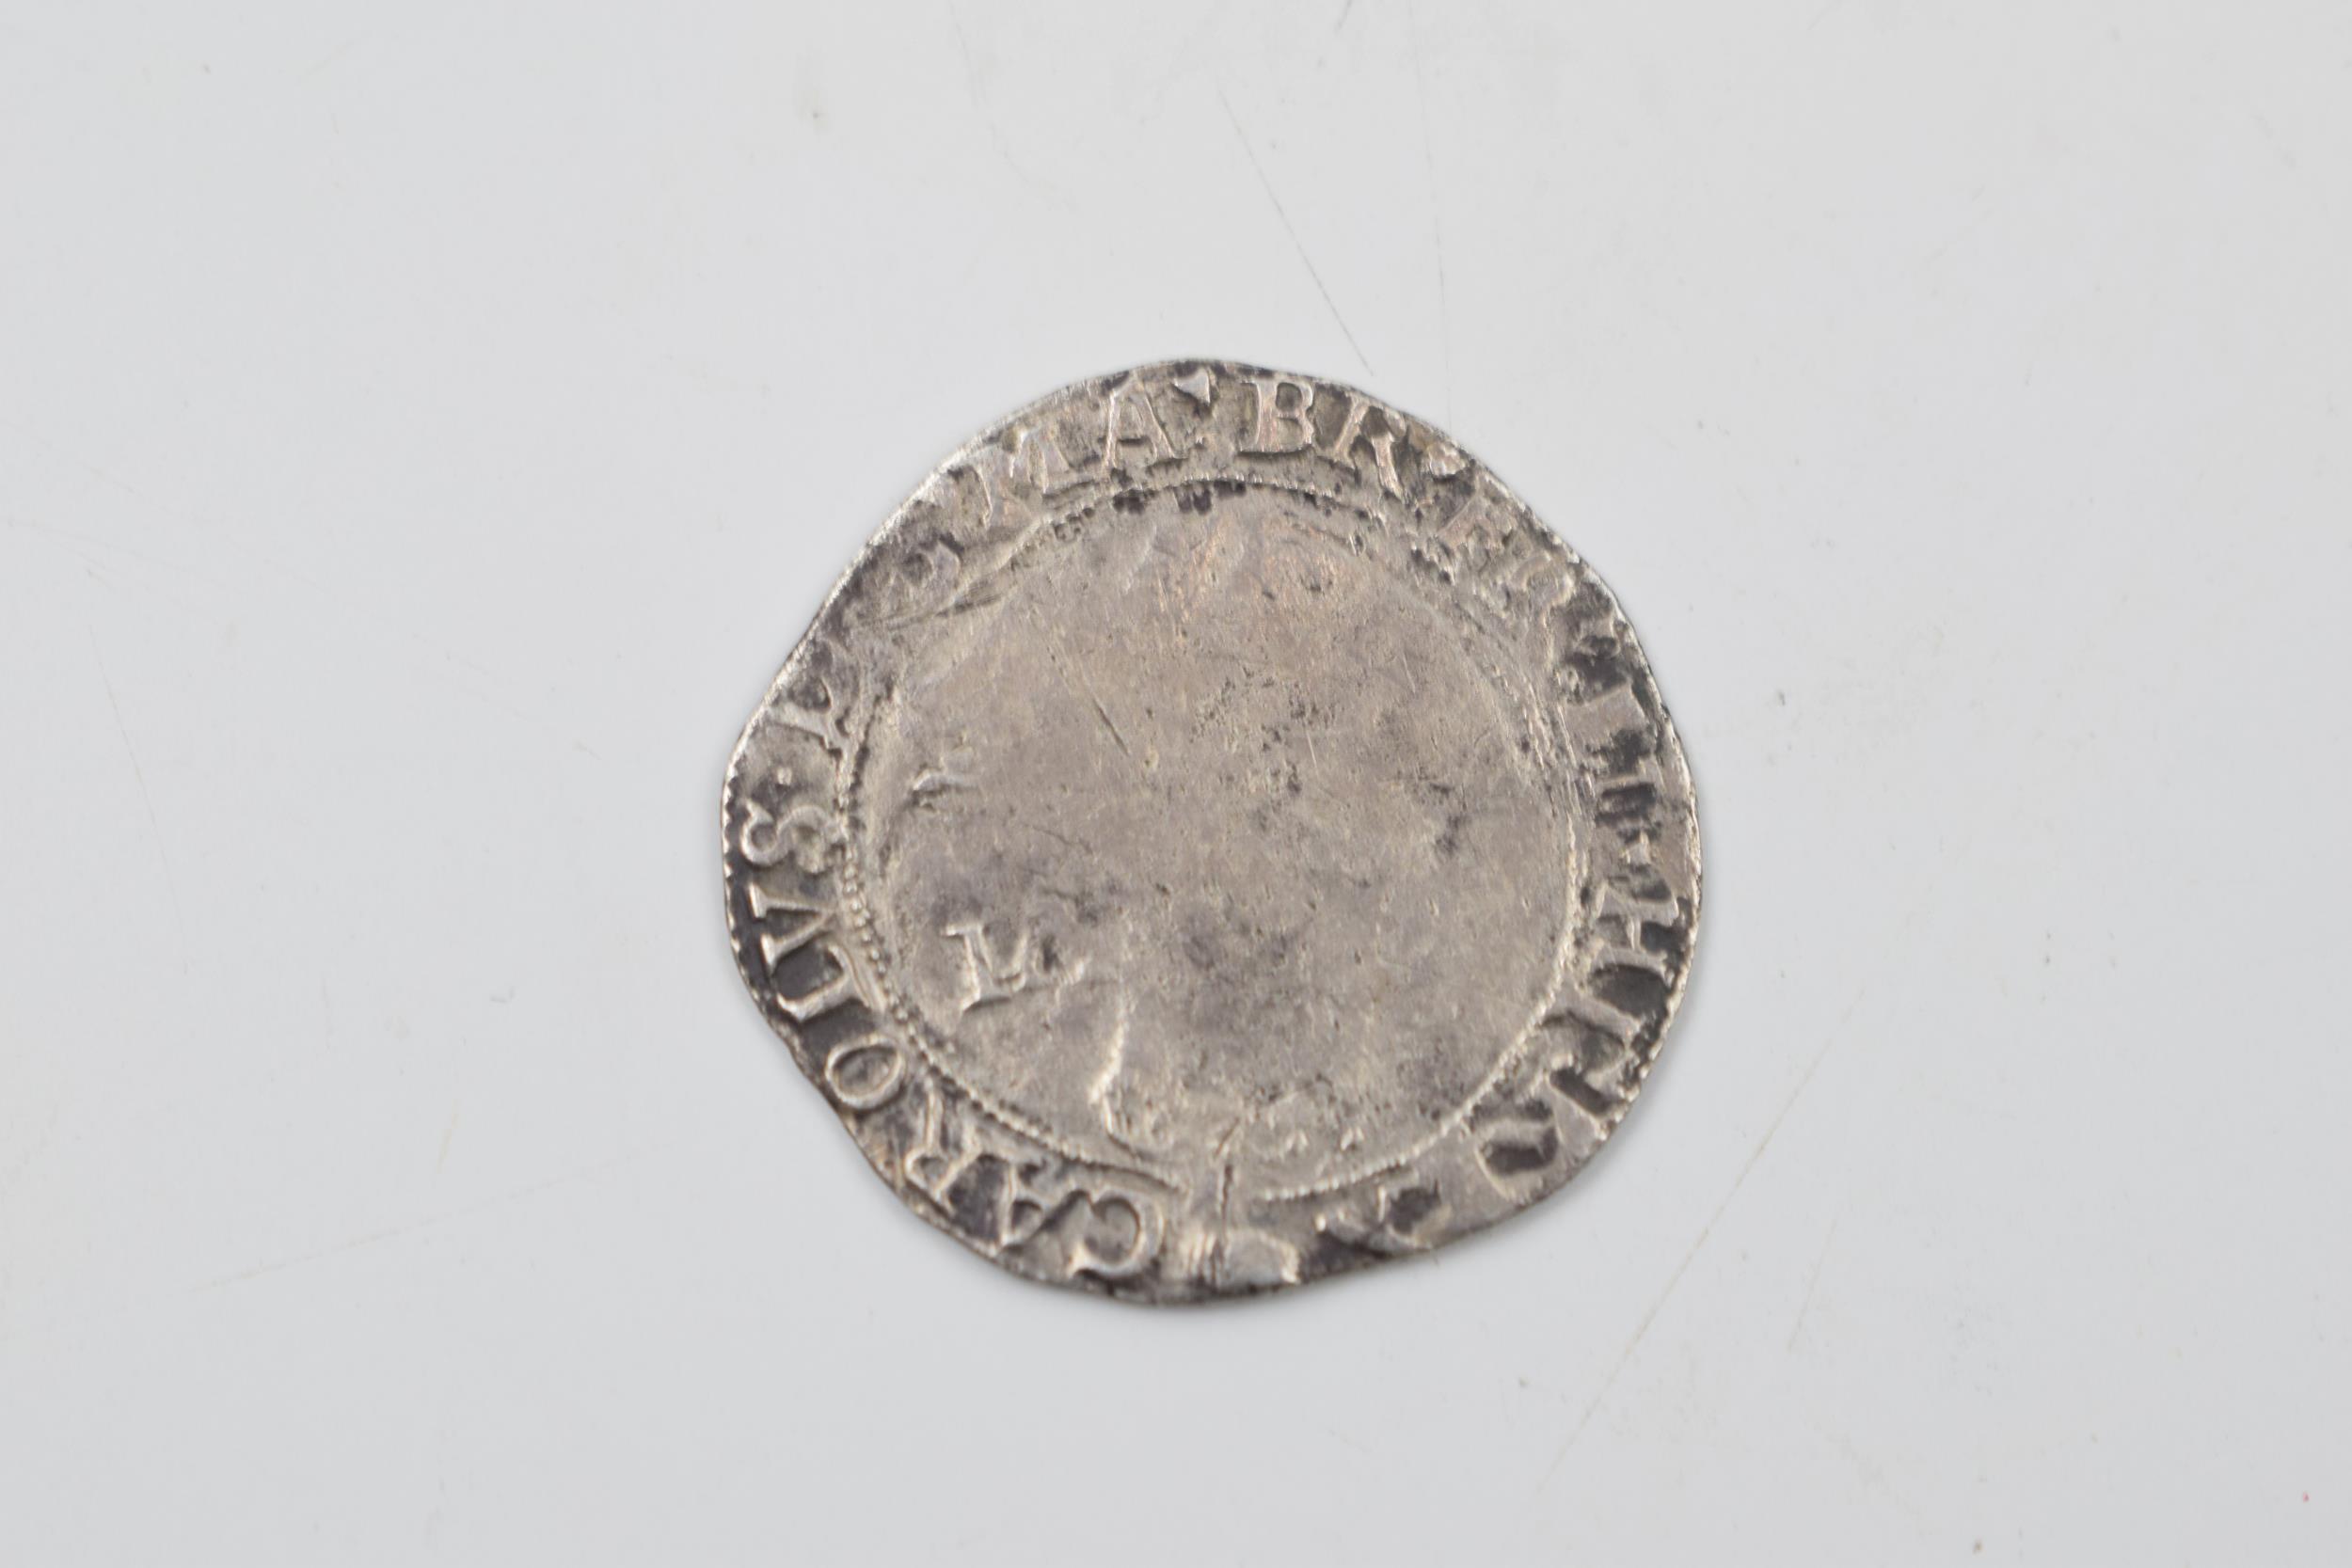 Charles I Sixpence 1636 - 38. Diameter 26.0mm. Weight 2.56g. Thickness 0.85mm. M/M TUN. VG/F. Graded - Image 2 of 3